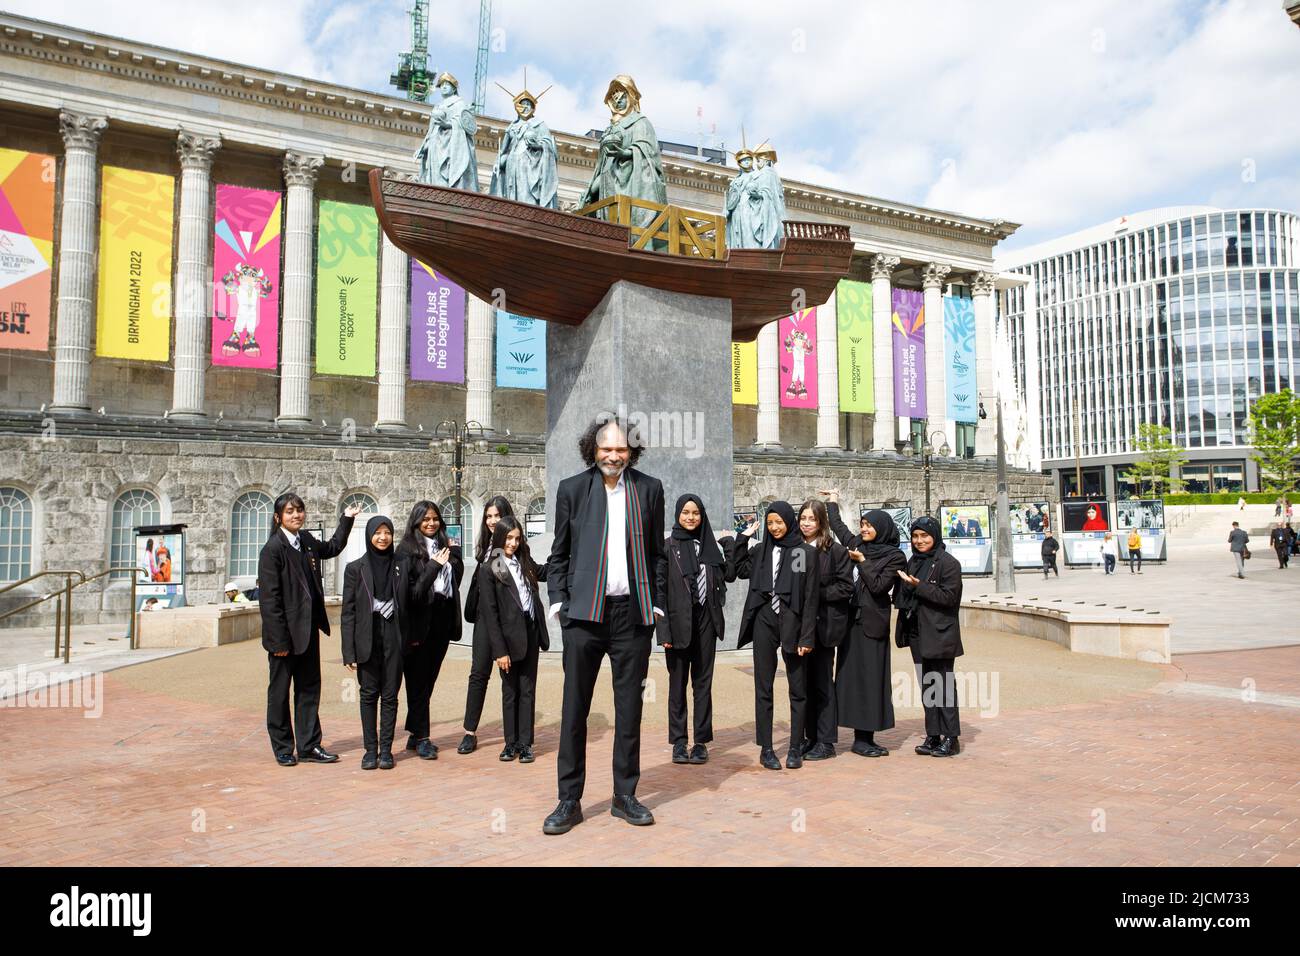 A major public artwork in which acclaimed Guyanese-British artist Hew Locke reimagines Birmingham’s city-centre sculpture of Queen Victoria. The project has been commissioned by Ikon Gallery for the Birmingham 2022 Festival (the cultural programme of the Commonwealth Games).  Titled Foreign Exchange, the spectacular work will be Locke’s first temporary public sculpture. Pictured Hew Locke with pupils from Small Heath Academy. Stock Photo